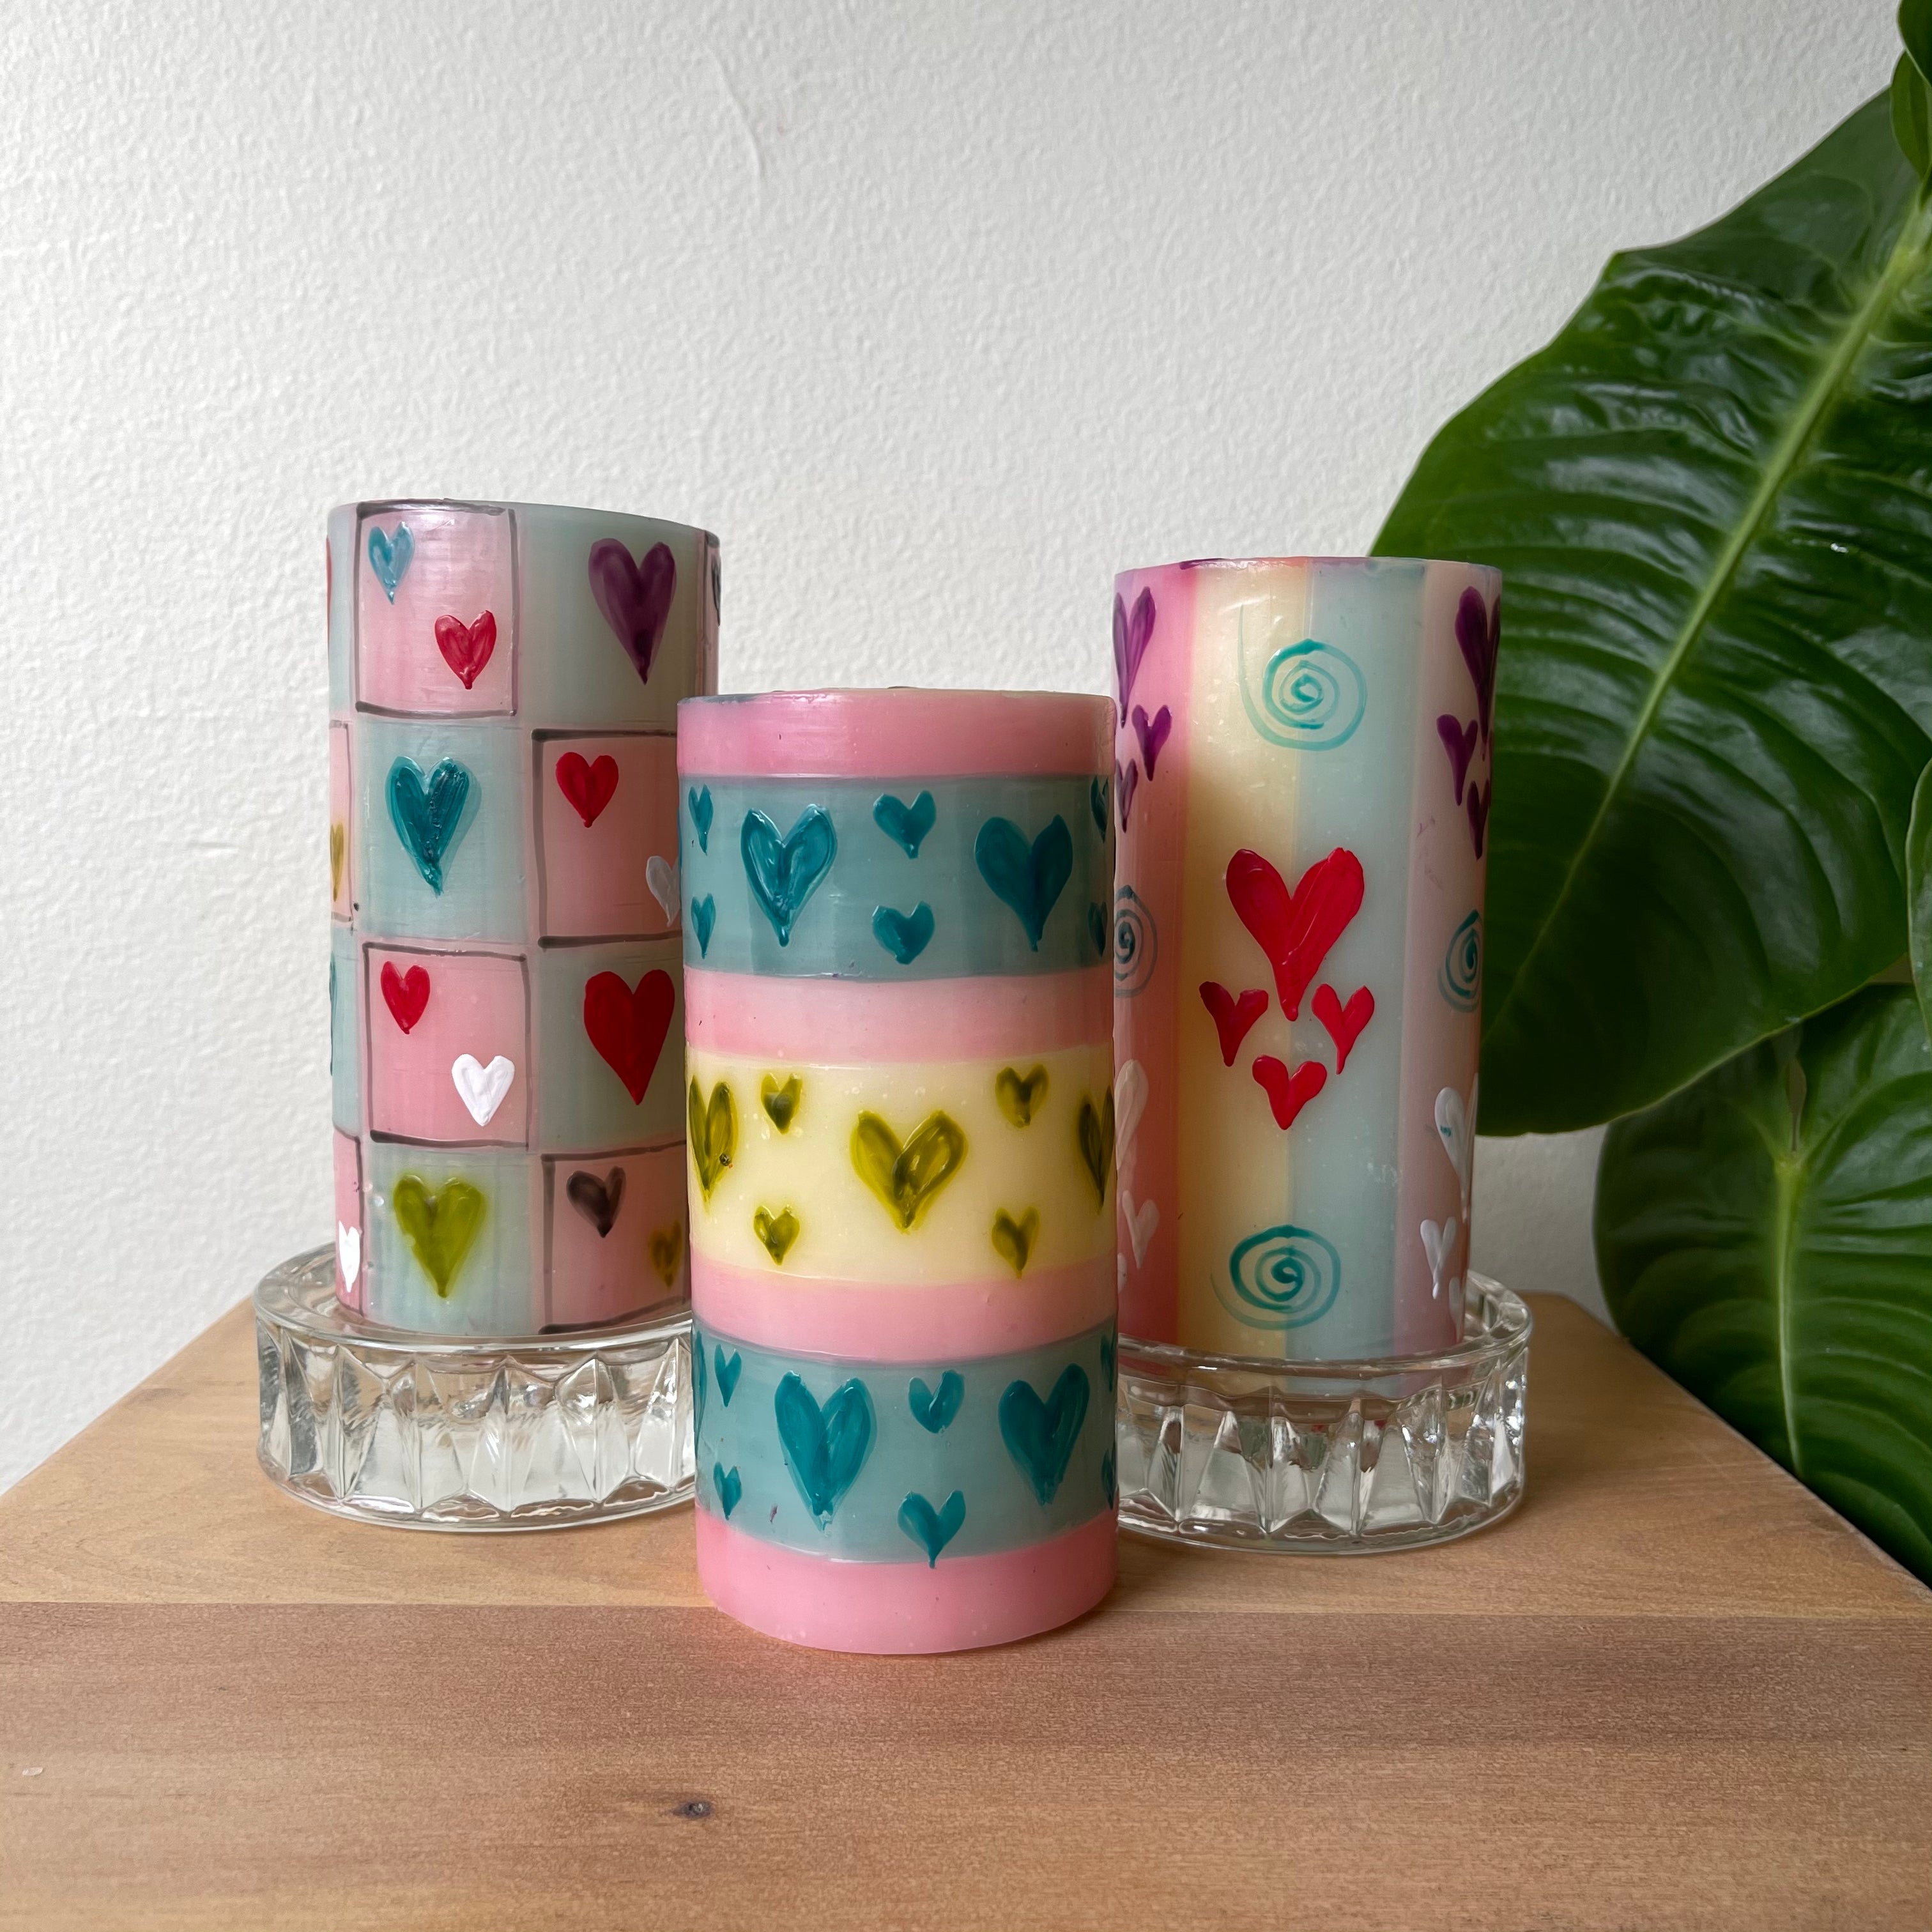 Three Pastel Heart 3x6 pillar candles.  Two are sitting on glass candle coasters.  All painted with hearts of various size & colors on pastel background. Very fun!